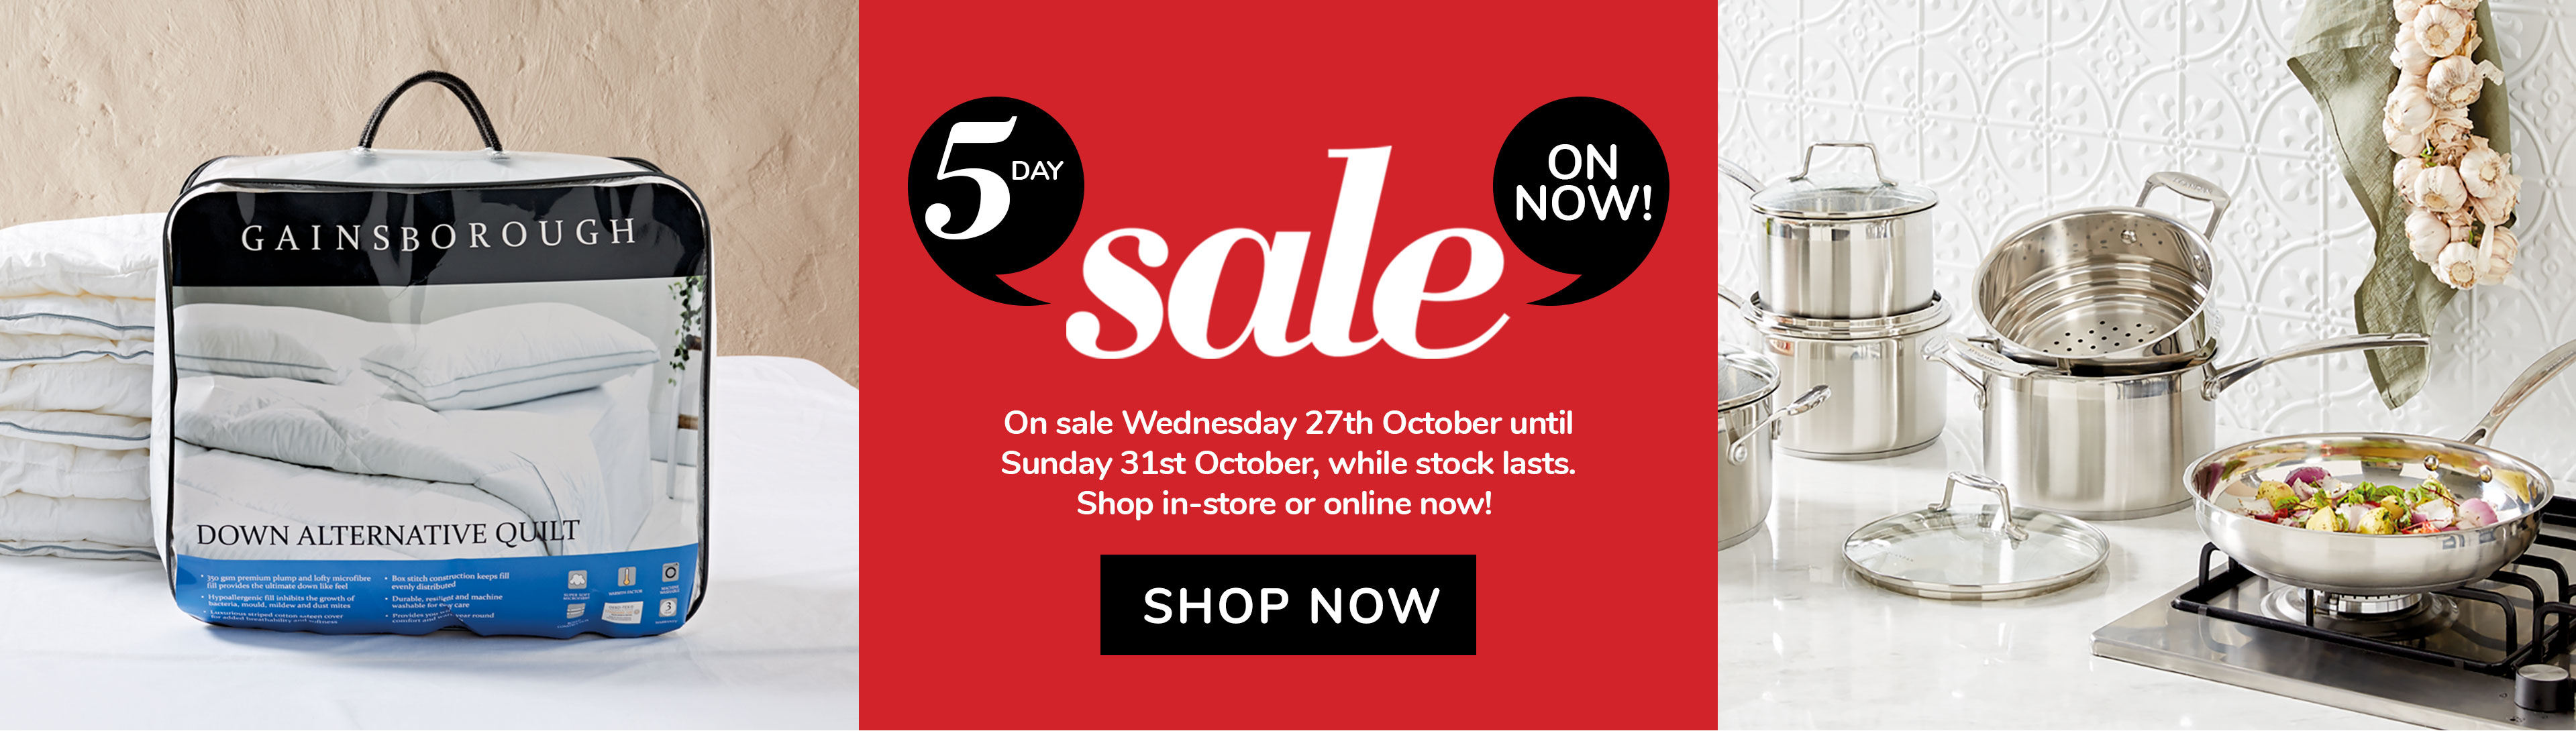 5 Day sale up to 60% OFF on kitchenware, clothing, footwear & more